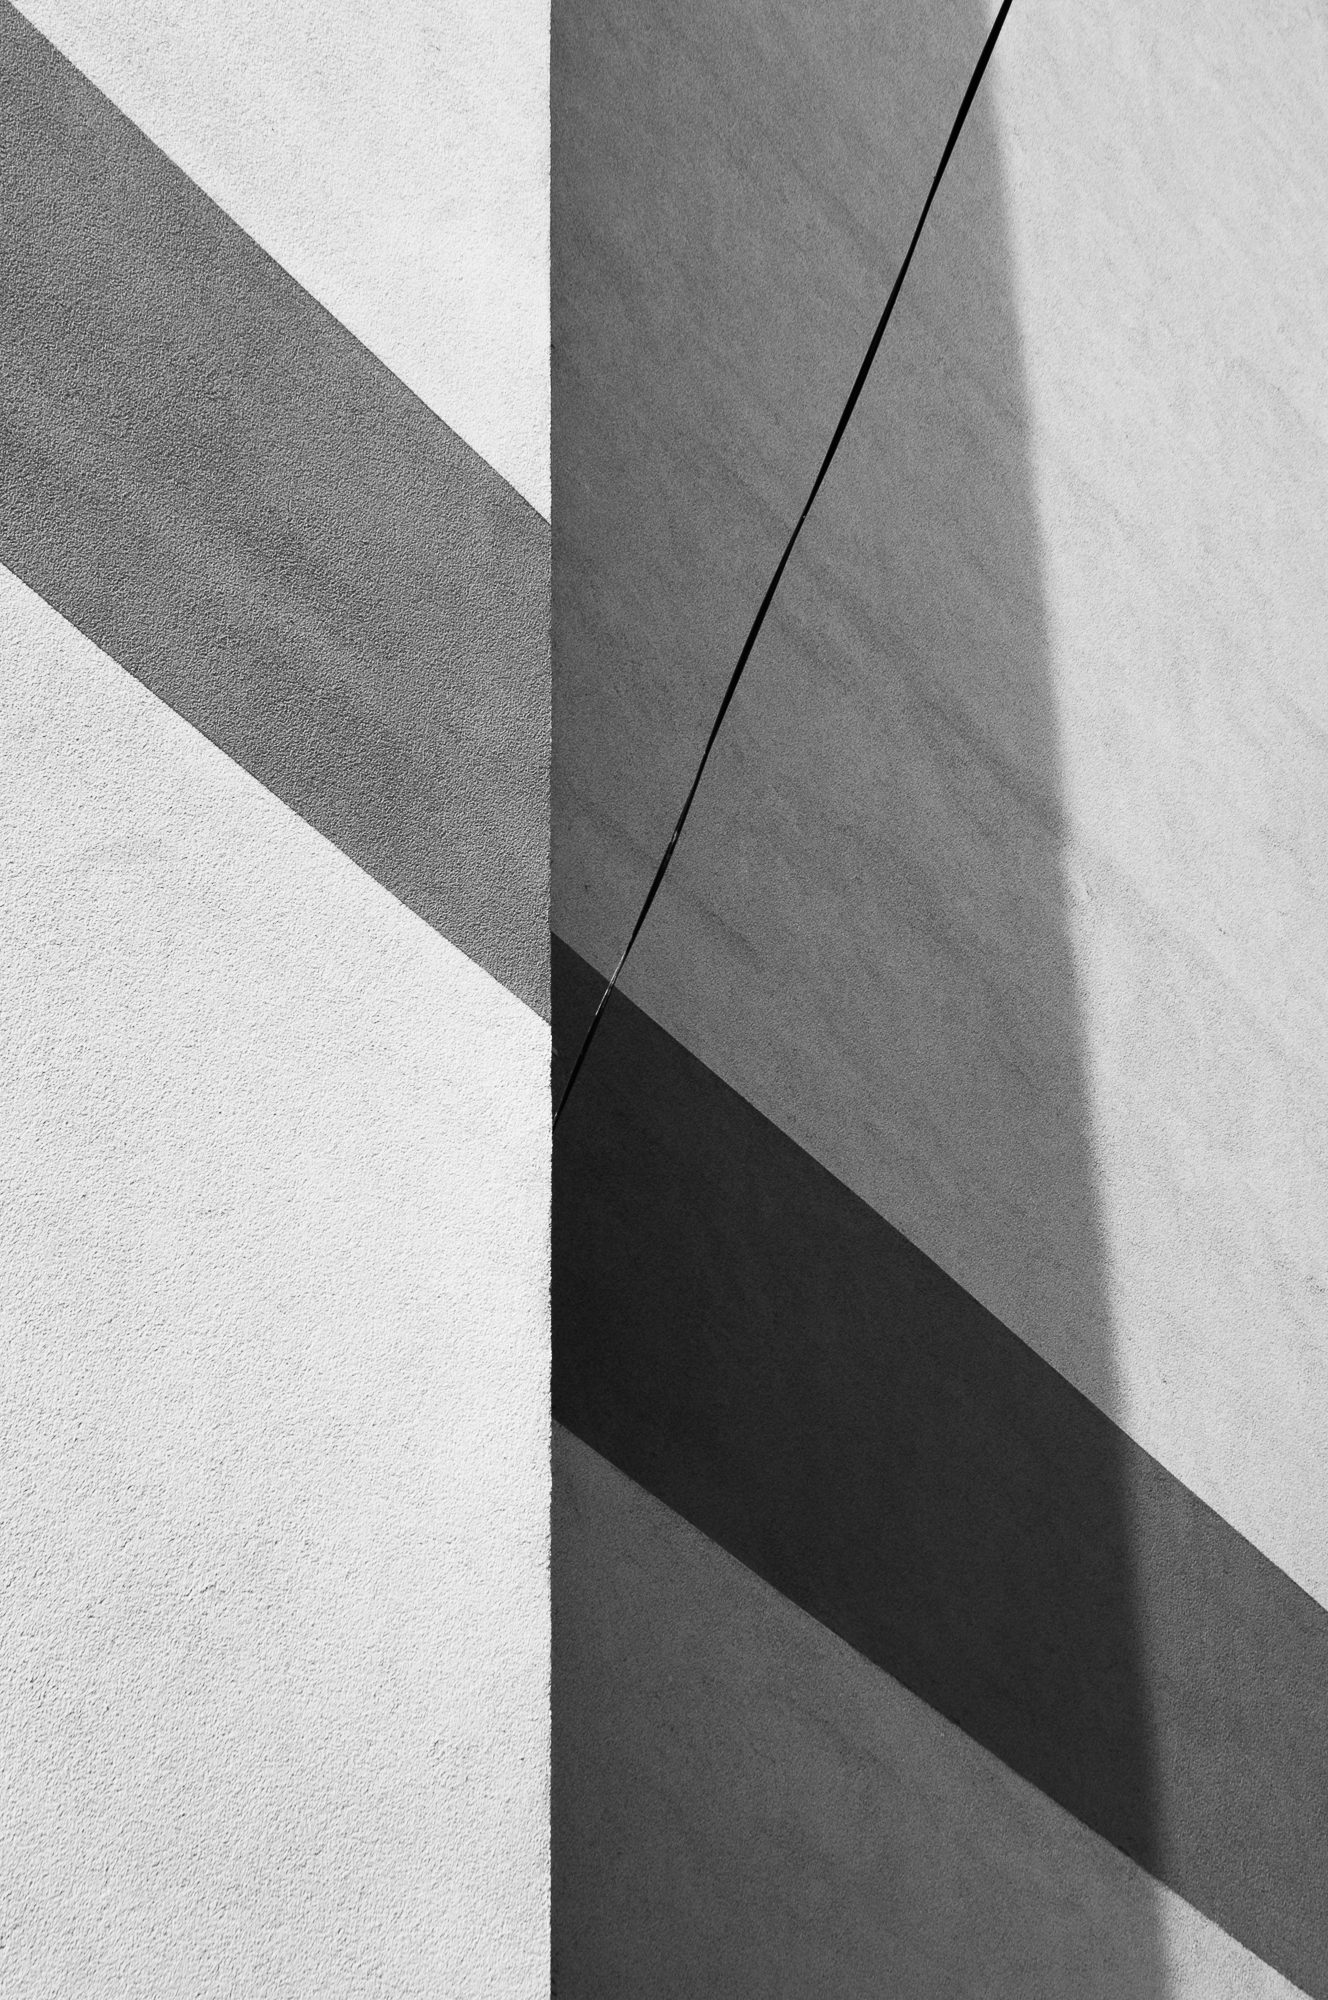 Adam Mazek Photography 2018. Warsaw Street Photography. Post: "Was I right?" Abstraction.